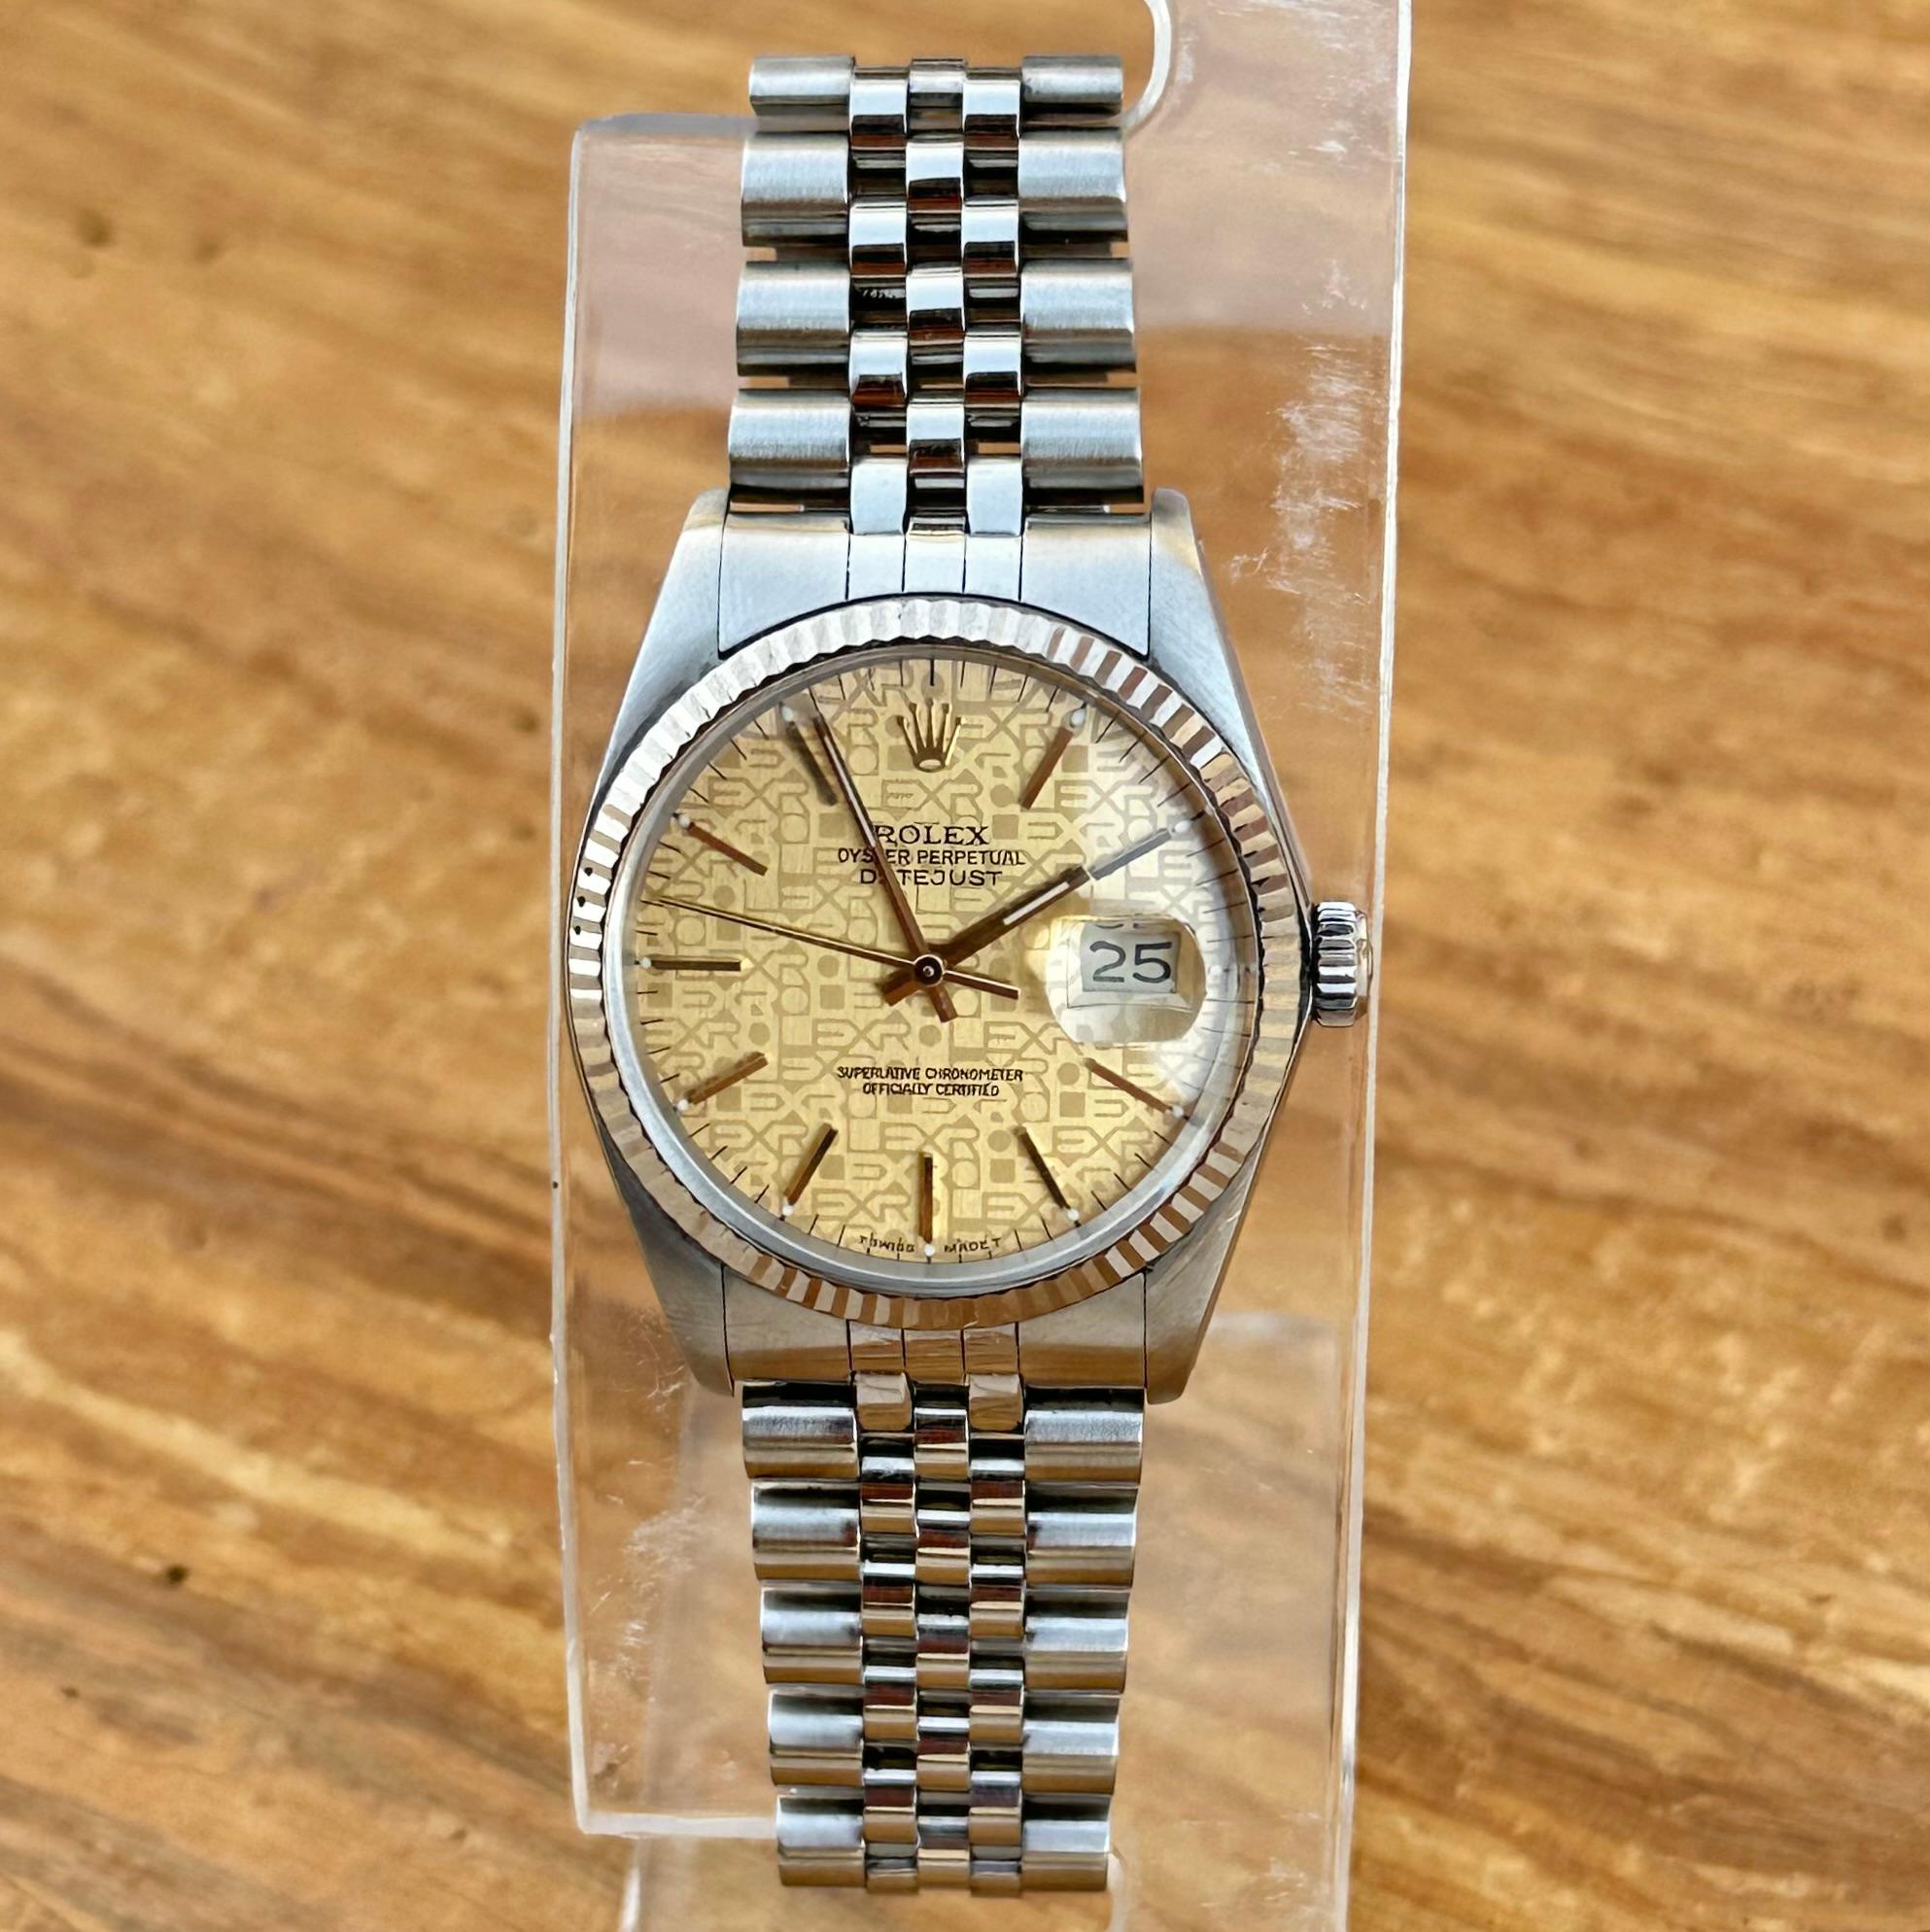 Rolex Datejust 36 36mm Ref 16014 Rare Jubilee dial anniversary dial Watch For Sale 8